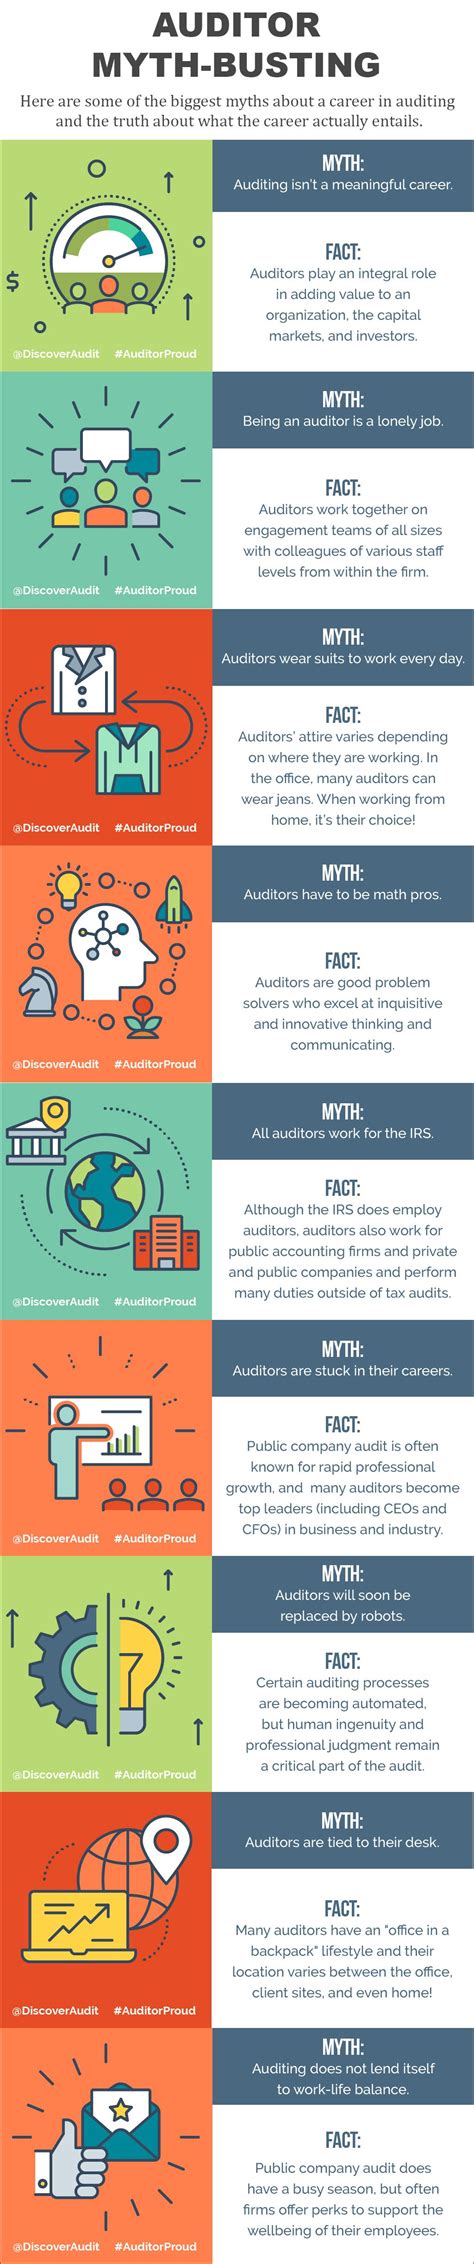 Auditor Proud Myth-Busting Infographic | Myth busted 